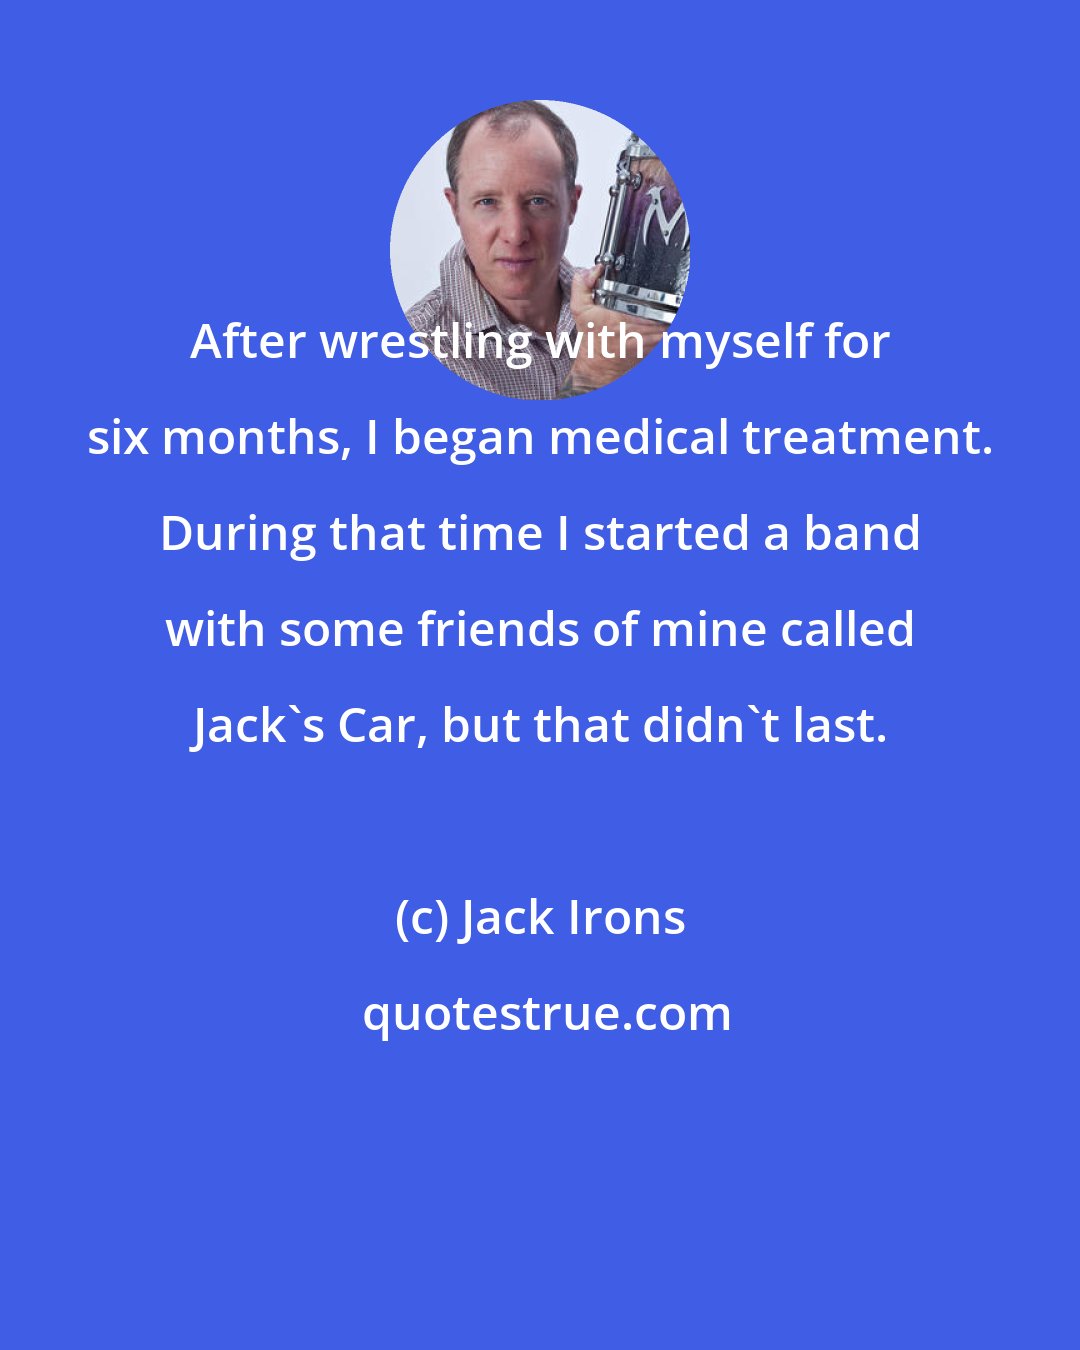 Jack Irons: After wrestling with myself for six months, I began medical treatment. During that time I started a band with some friends of mine called Jack's Car, but that didn't last.